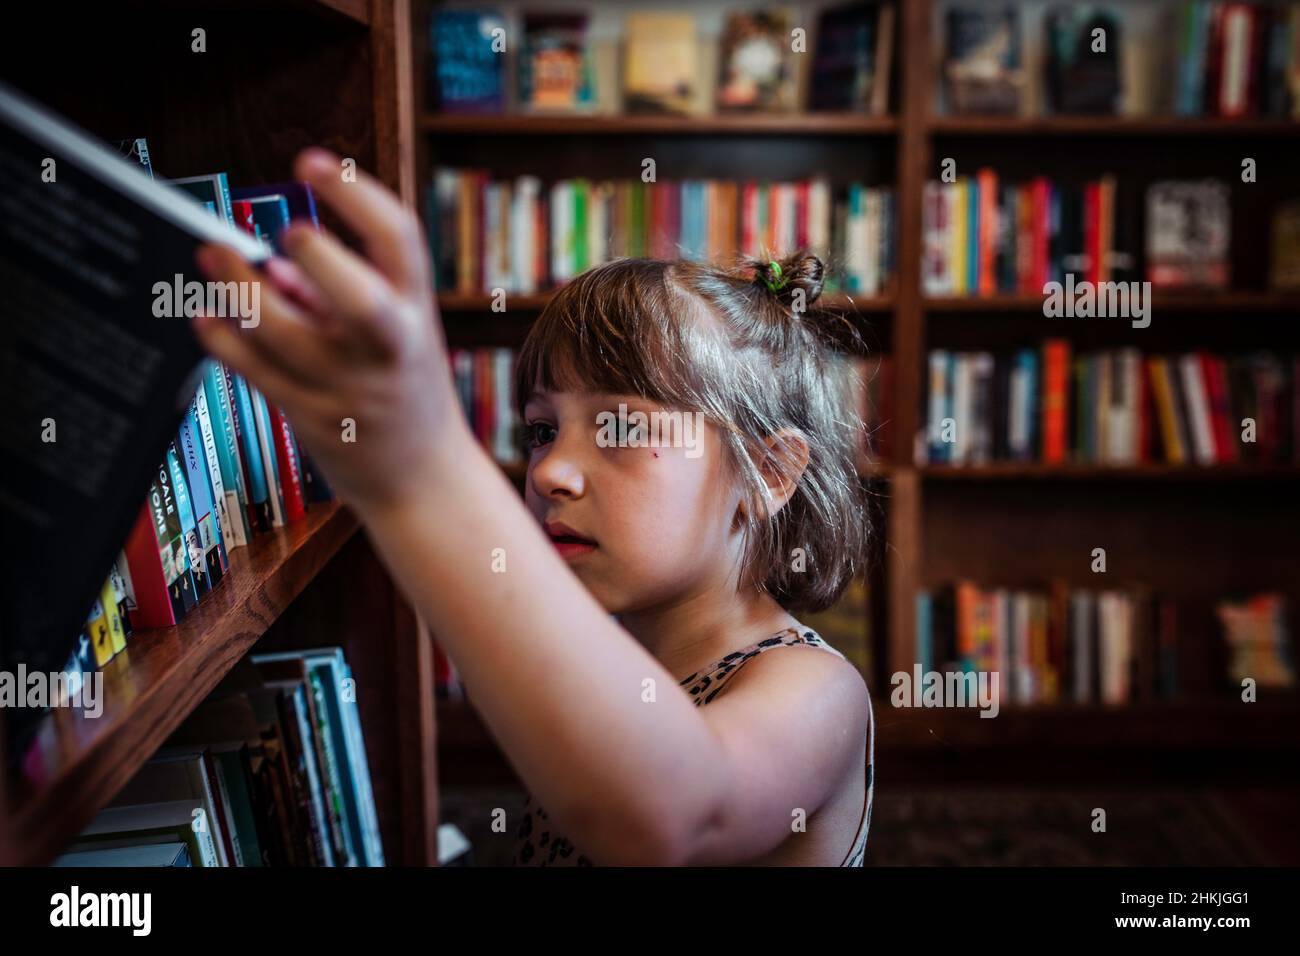 Child at library bookstore looking at books Stock Photo